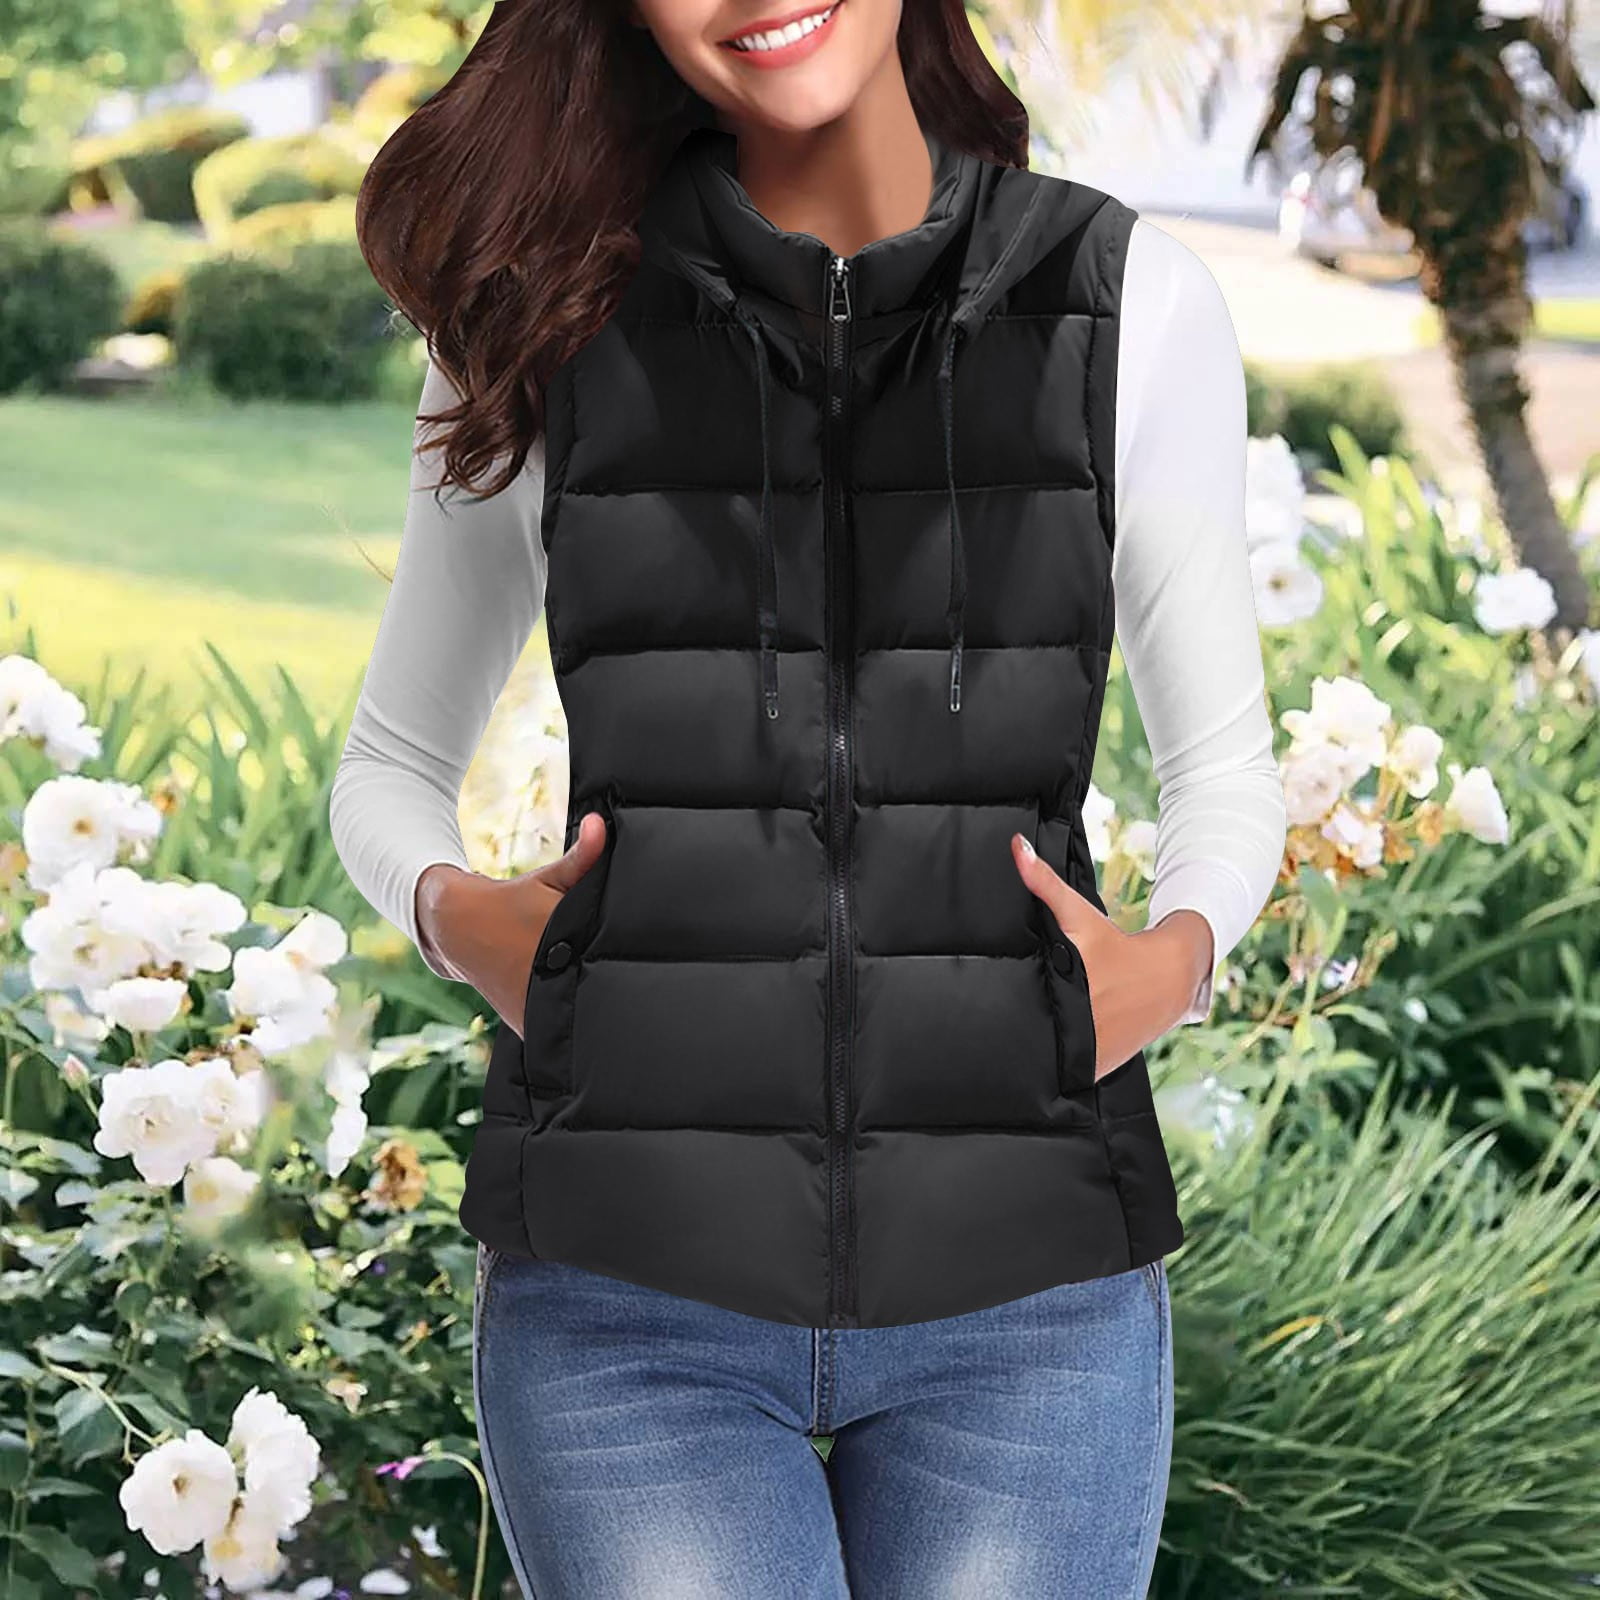 CAICJ98 Vests For Women Work Women's Quilted Vest Lightweight Padded Gilet  Stand Collar Sleeveless Zip Up Puffer Warm Jacket Grey,L